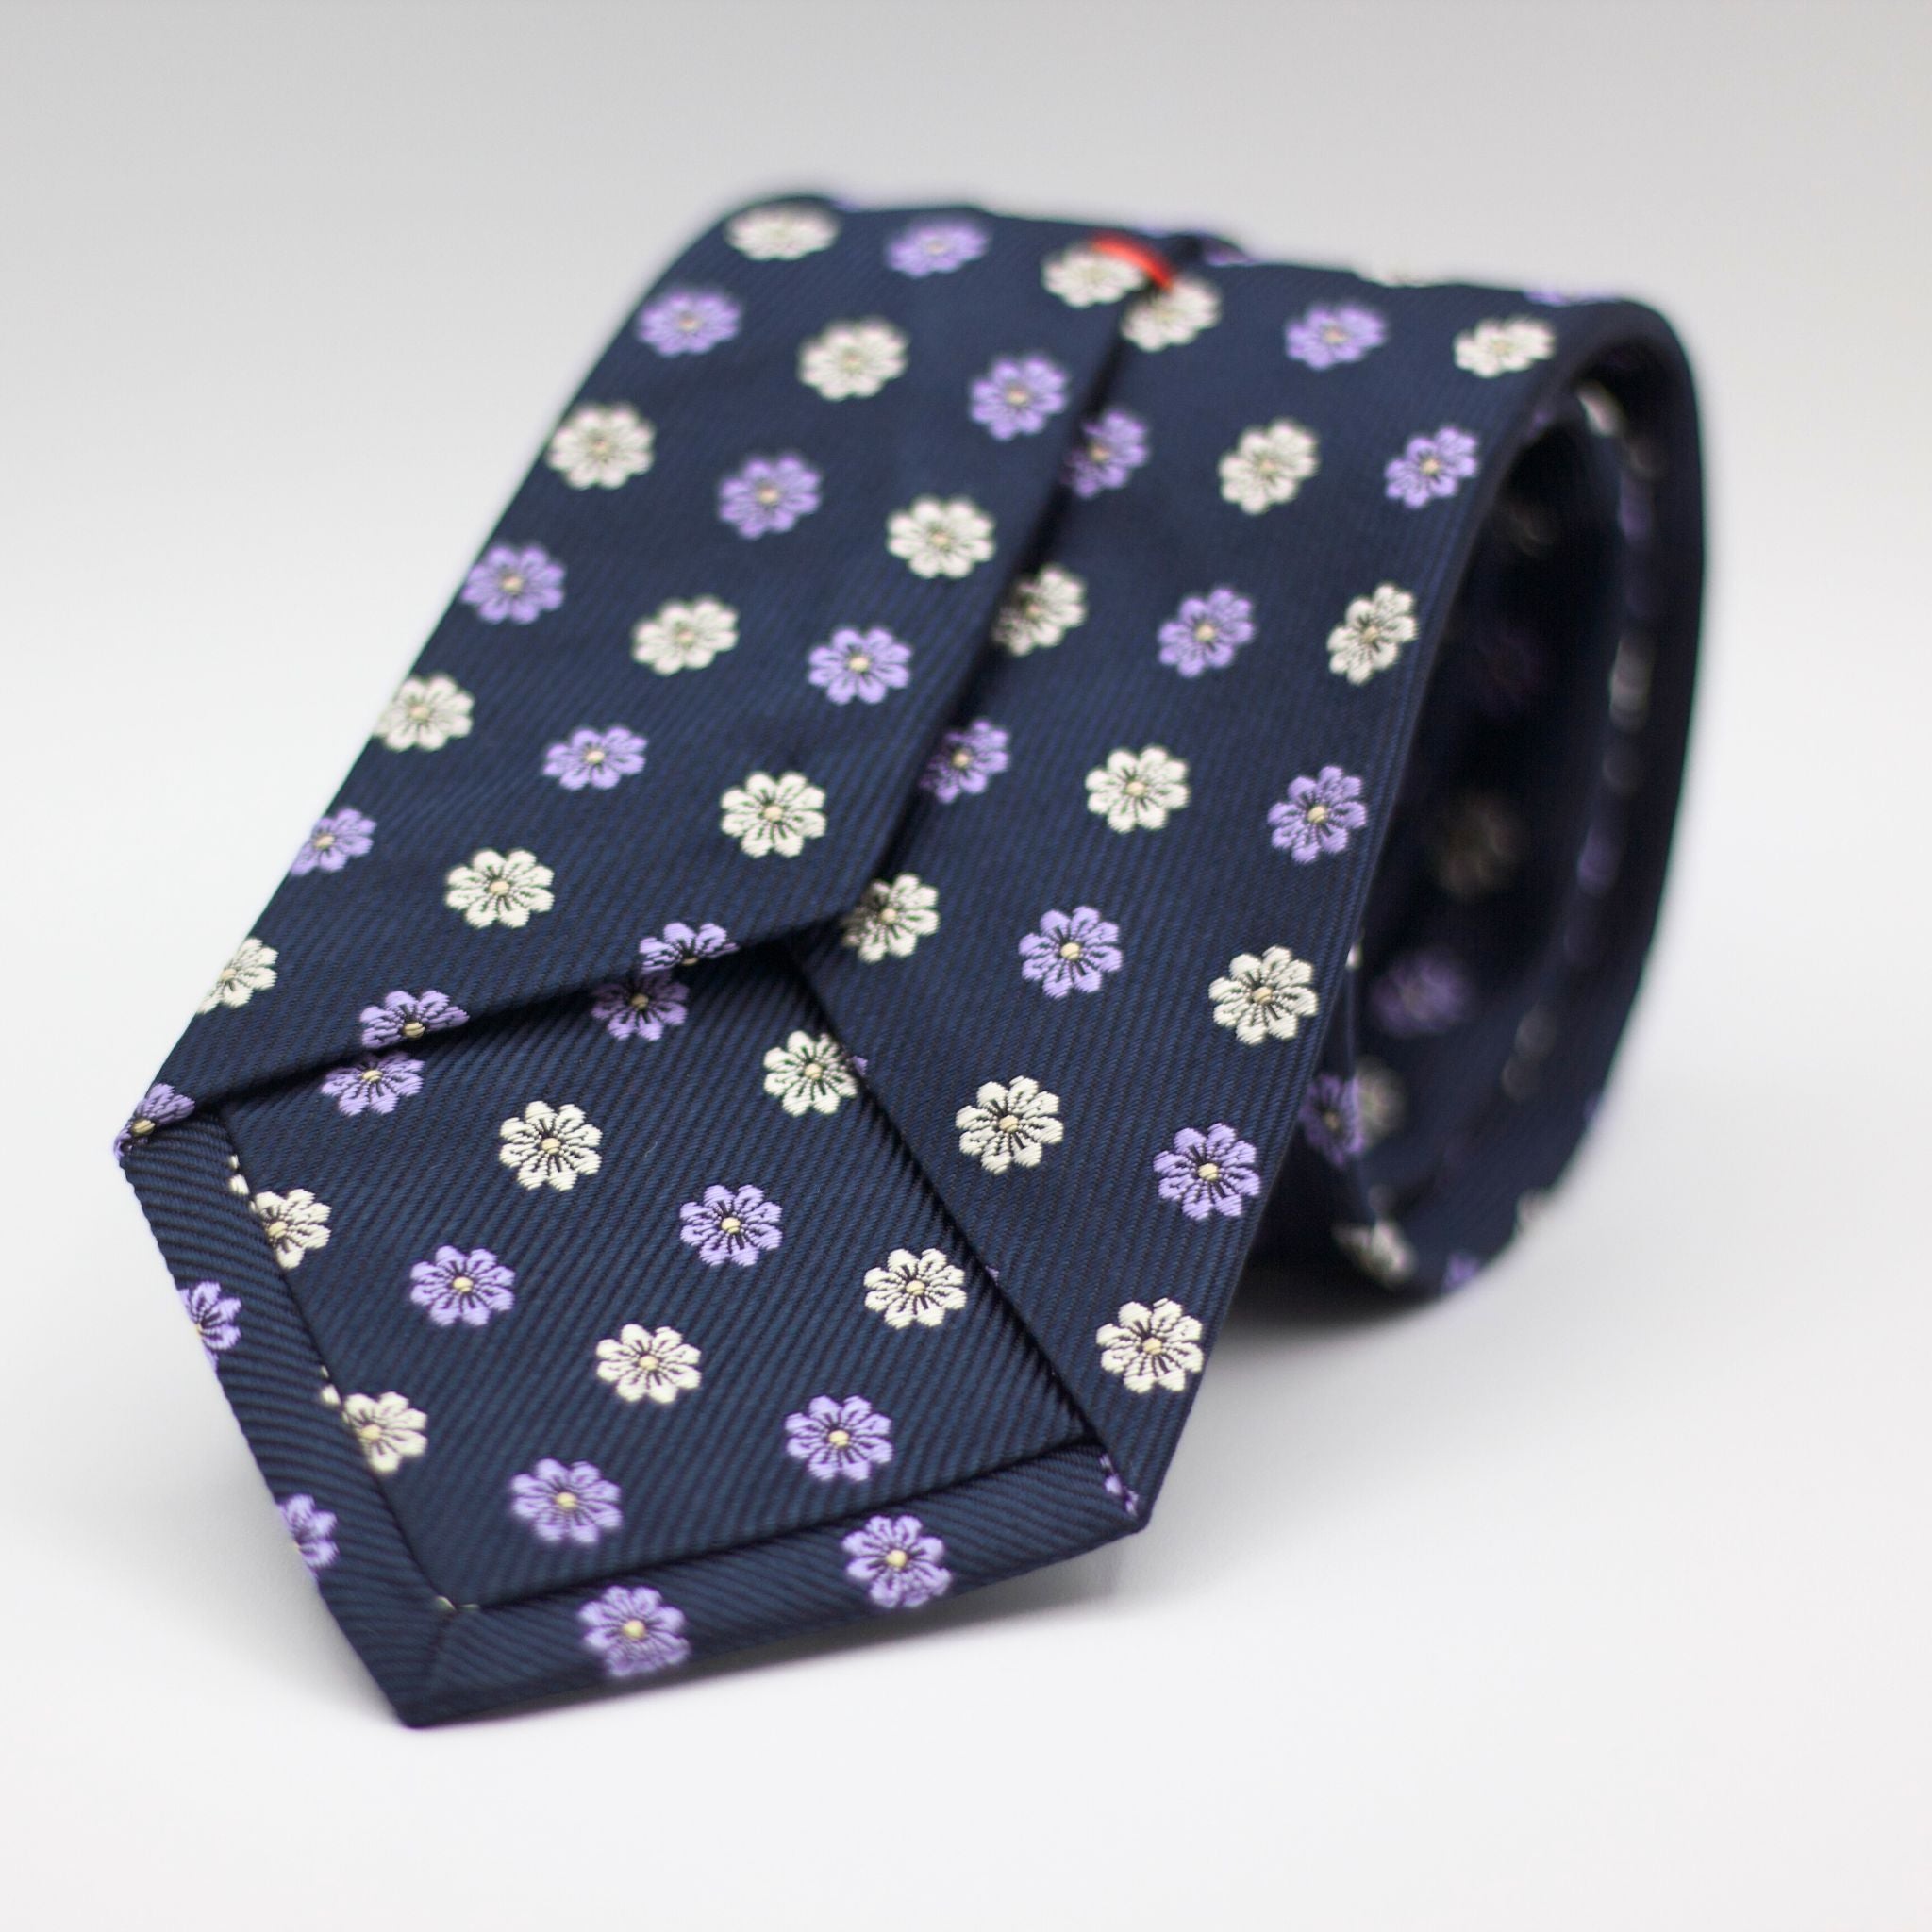 Cruciani & Bella 100% Silk Made in England Jacquard  Tipped Blue, White and Lilac Floral Motif Tie Handmade in Italy 8 cm x 150 cm